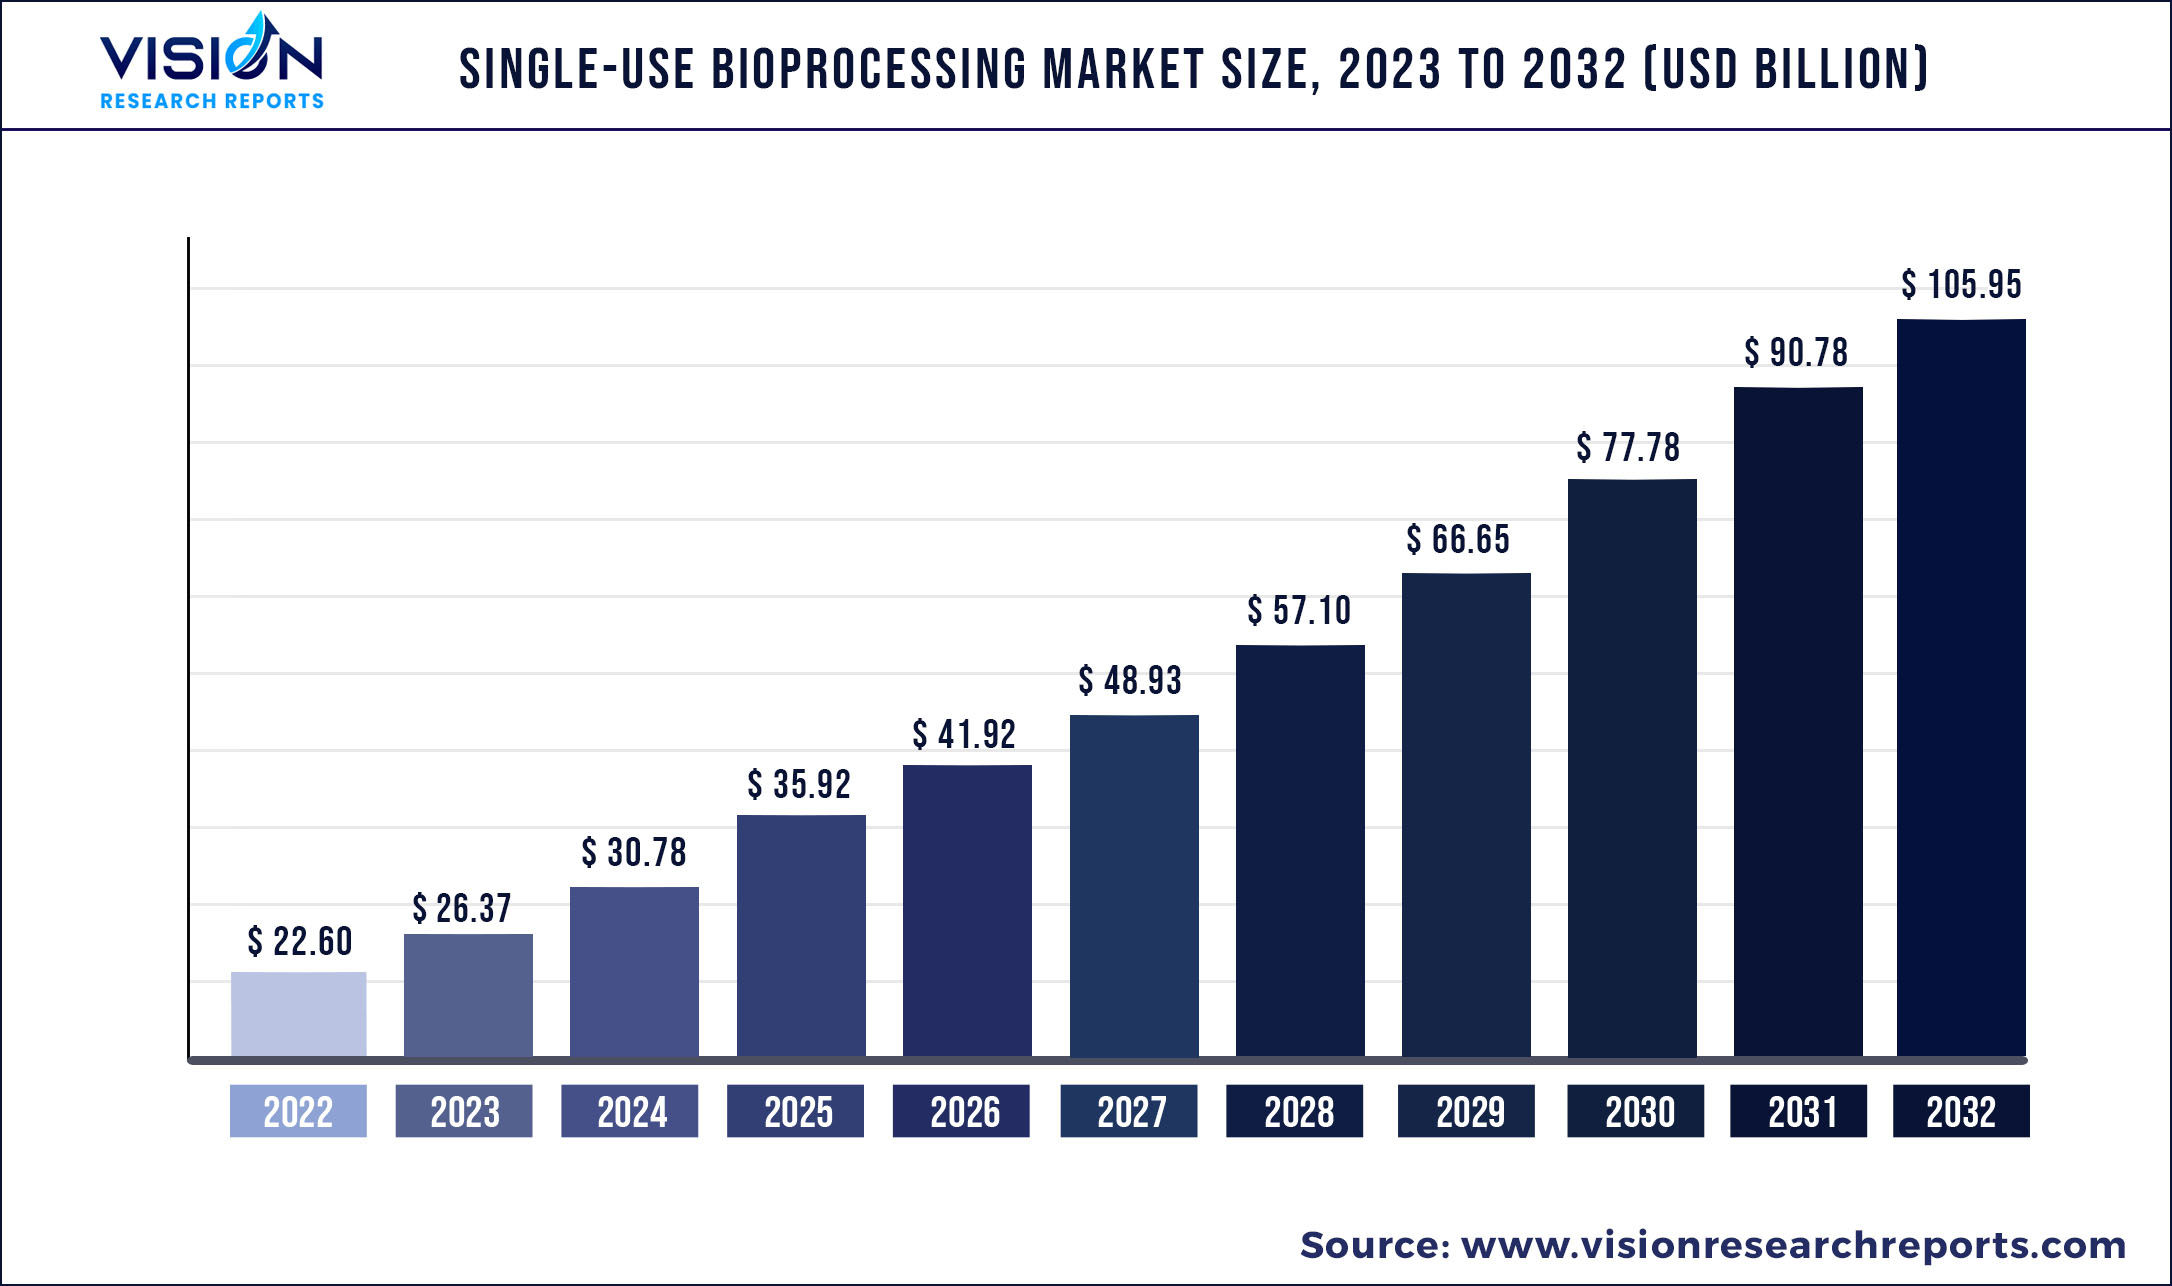 Single-use Bioprocessing Market Size 2023 to 2032